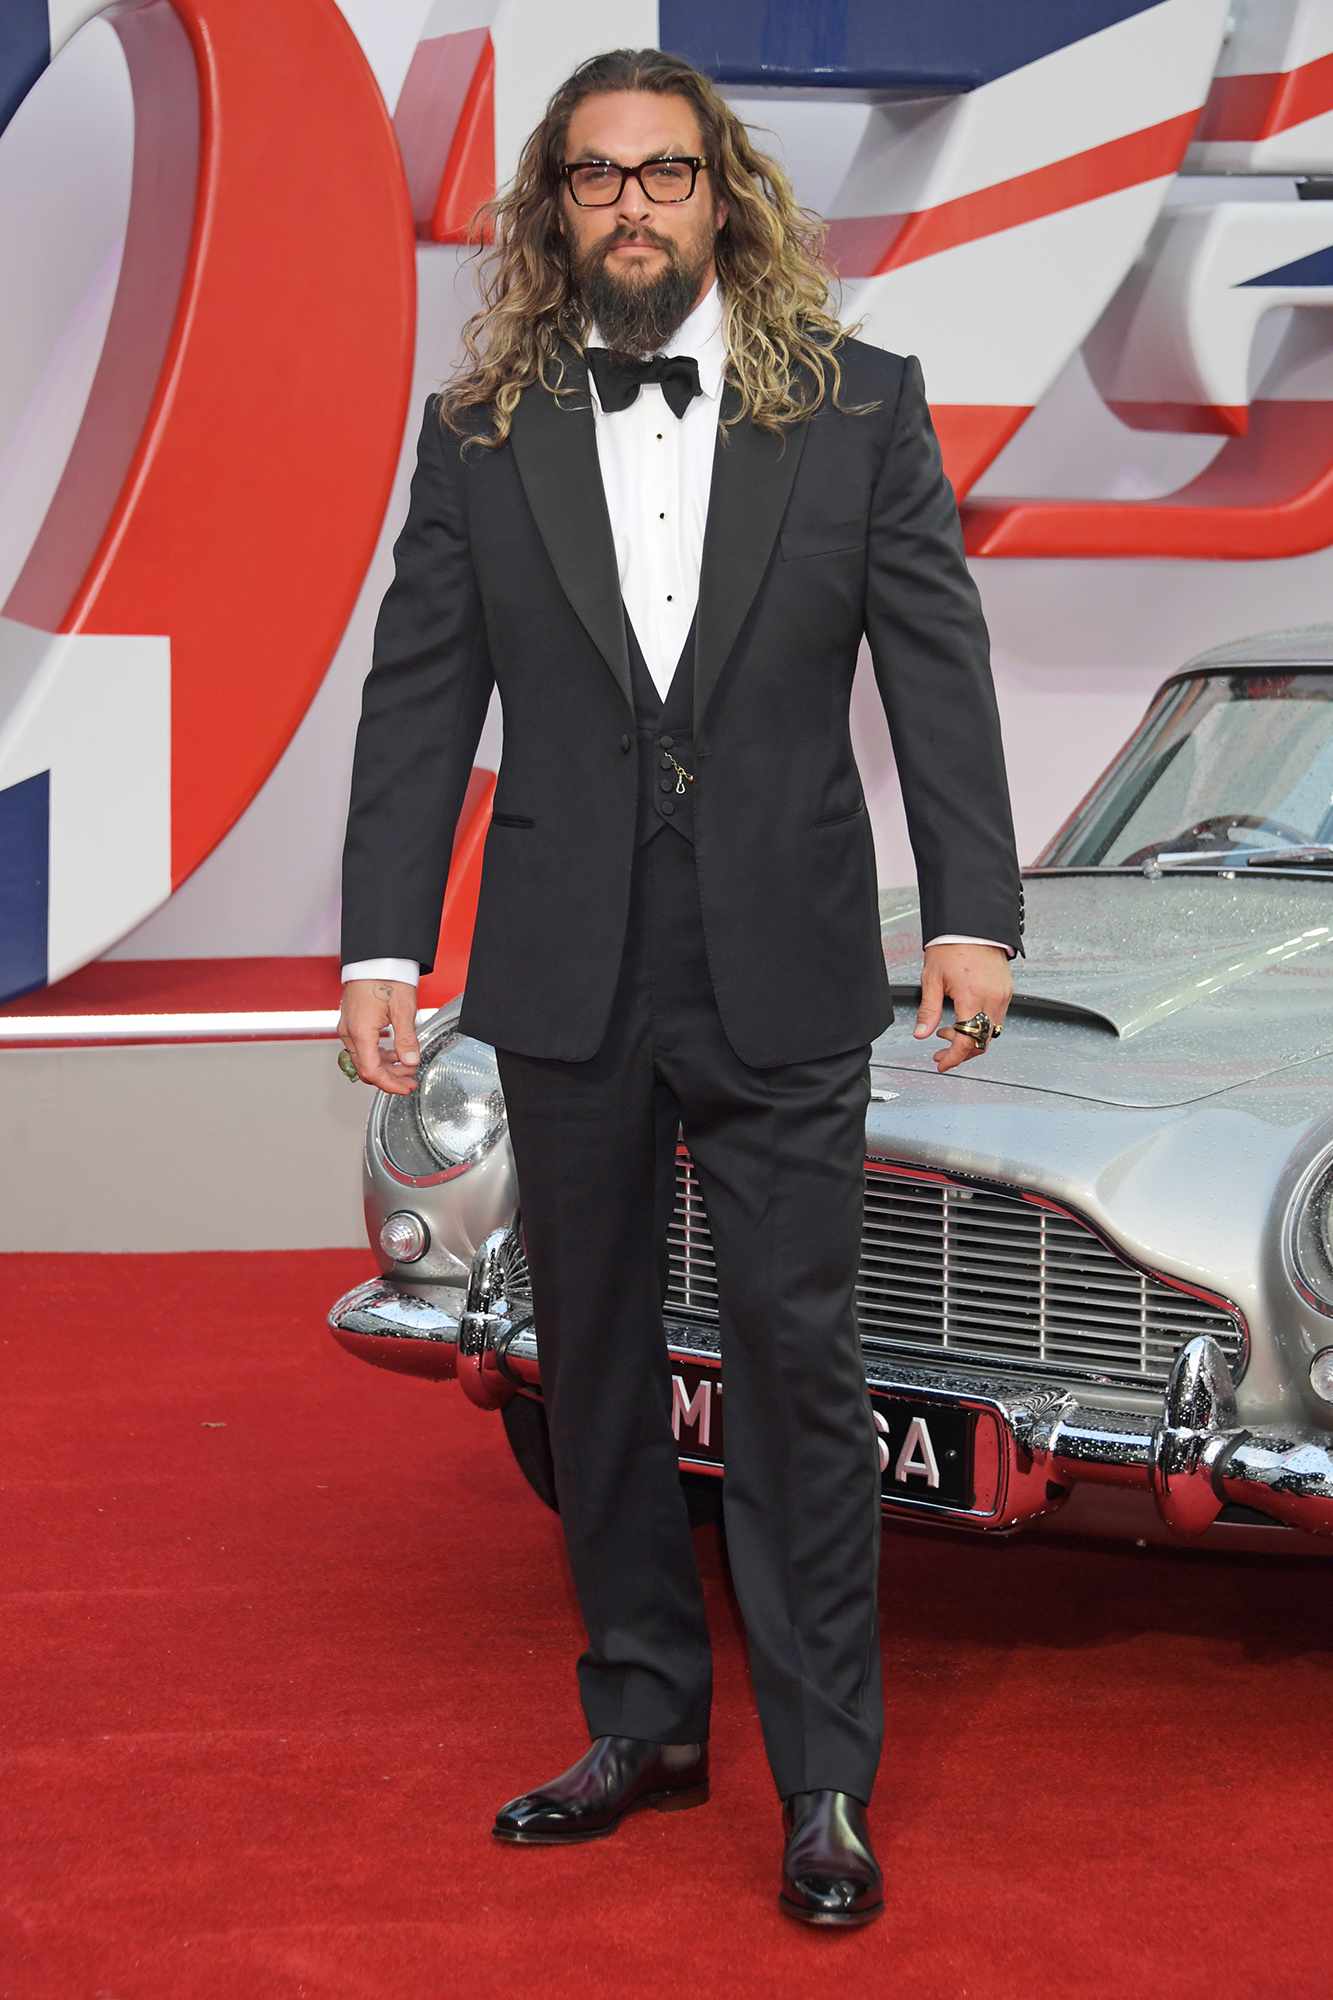 Jason Momoa attends the World Premiere of "No Time To Die" at the Royal Albert Hall on September 28, 2021 in London